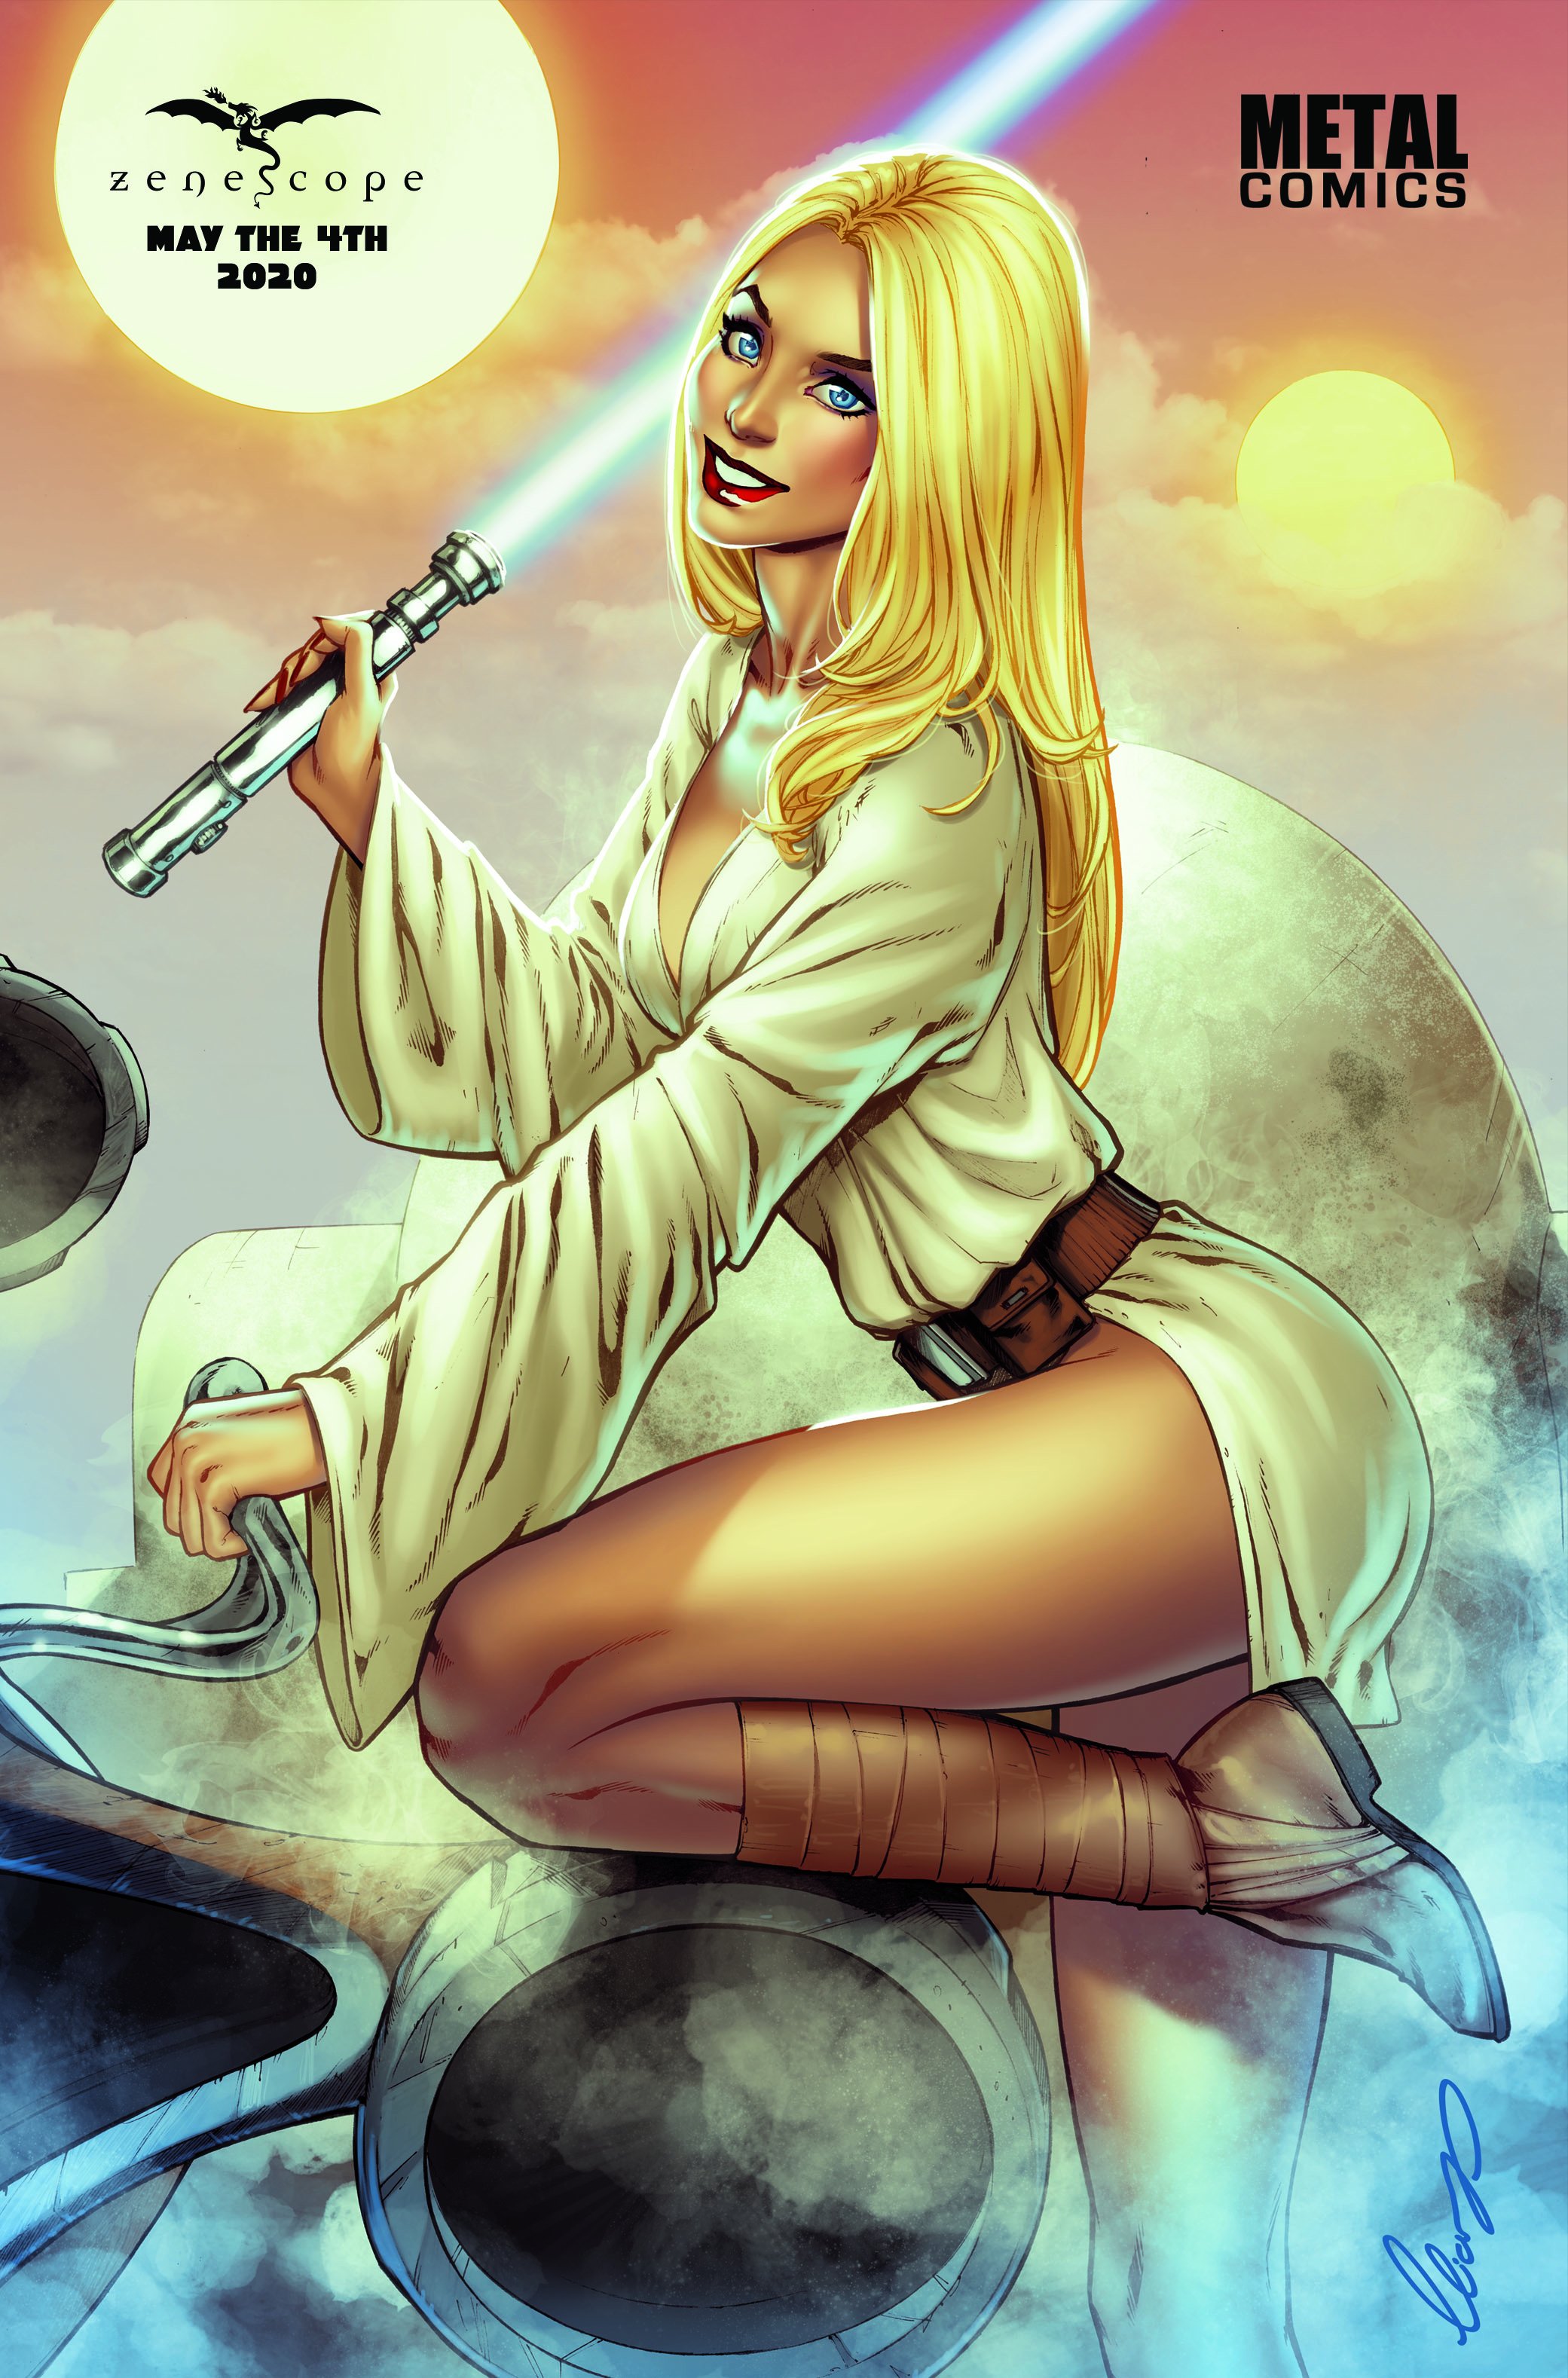 Image of May the 4th 2020 - Light Side Metal Cover #3